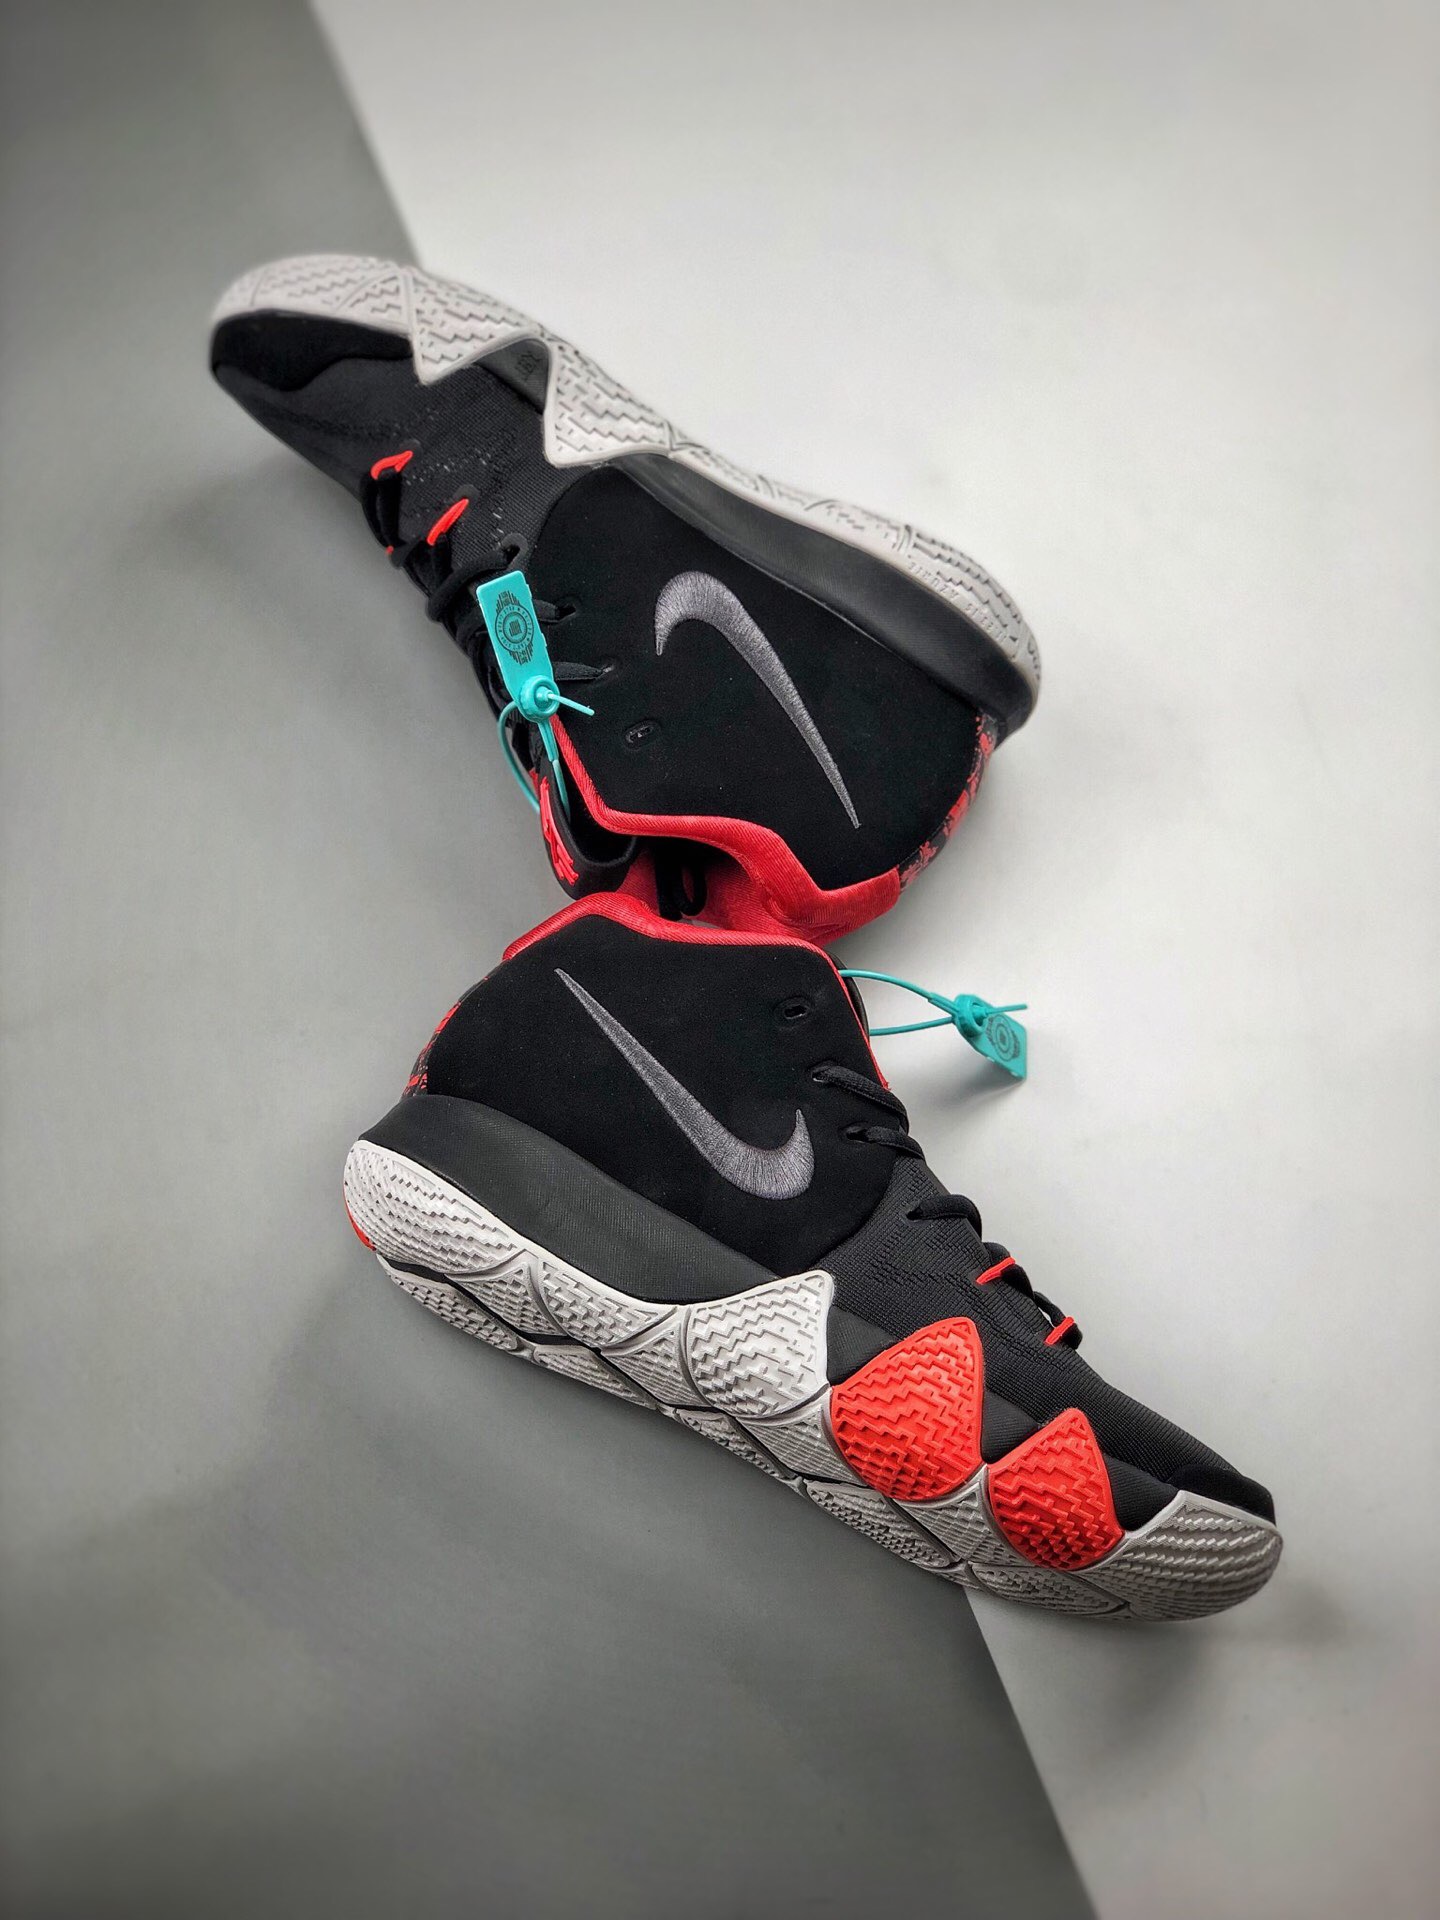 Nike Kyrie 4 “41 for the Ages” Black/Dark Grey 943806-005 For Sale ...